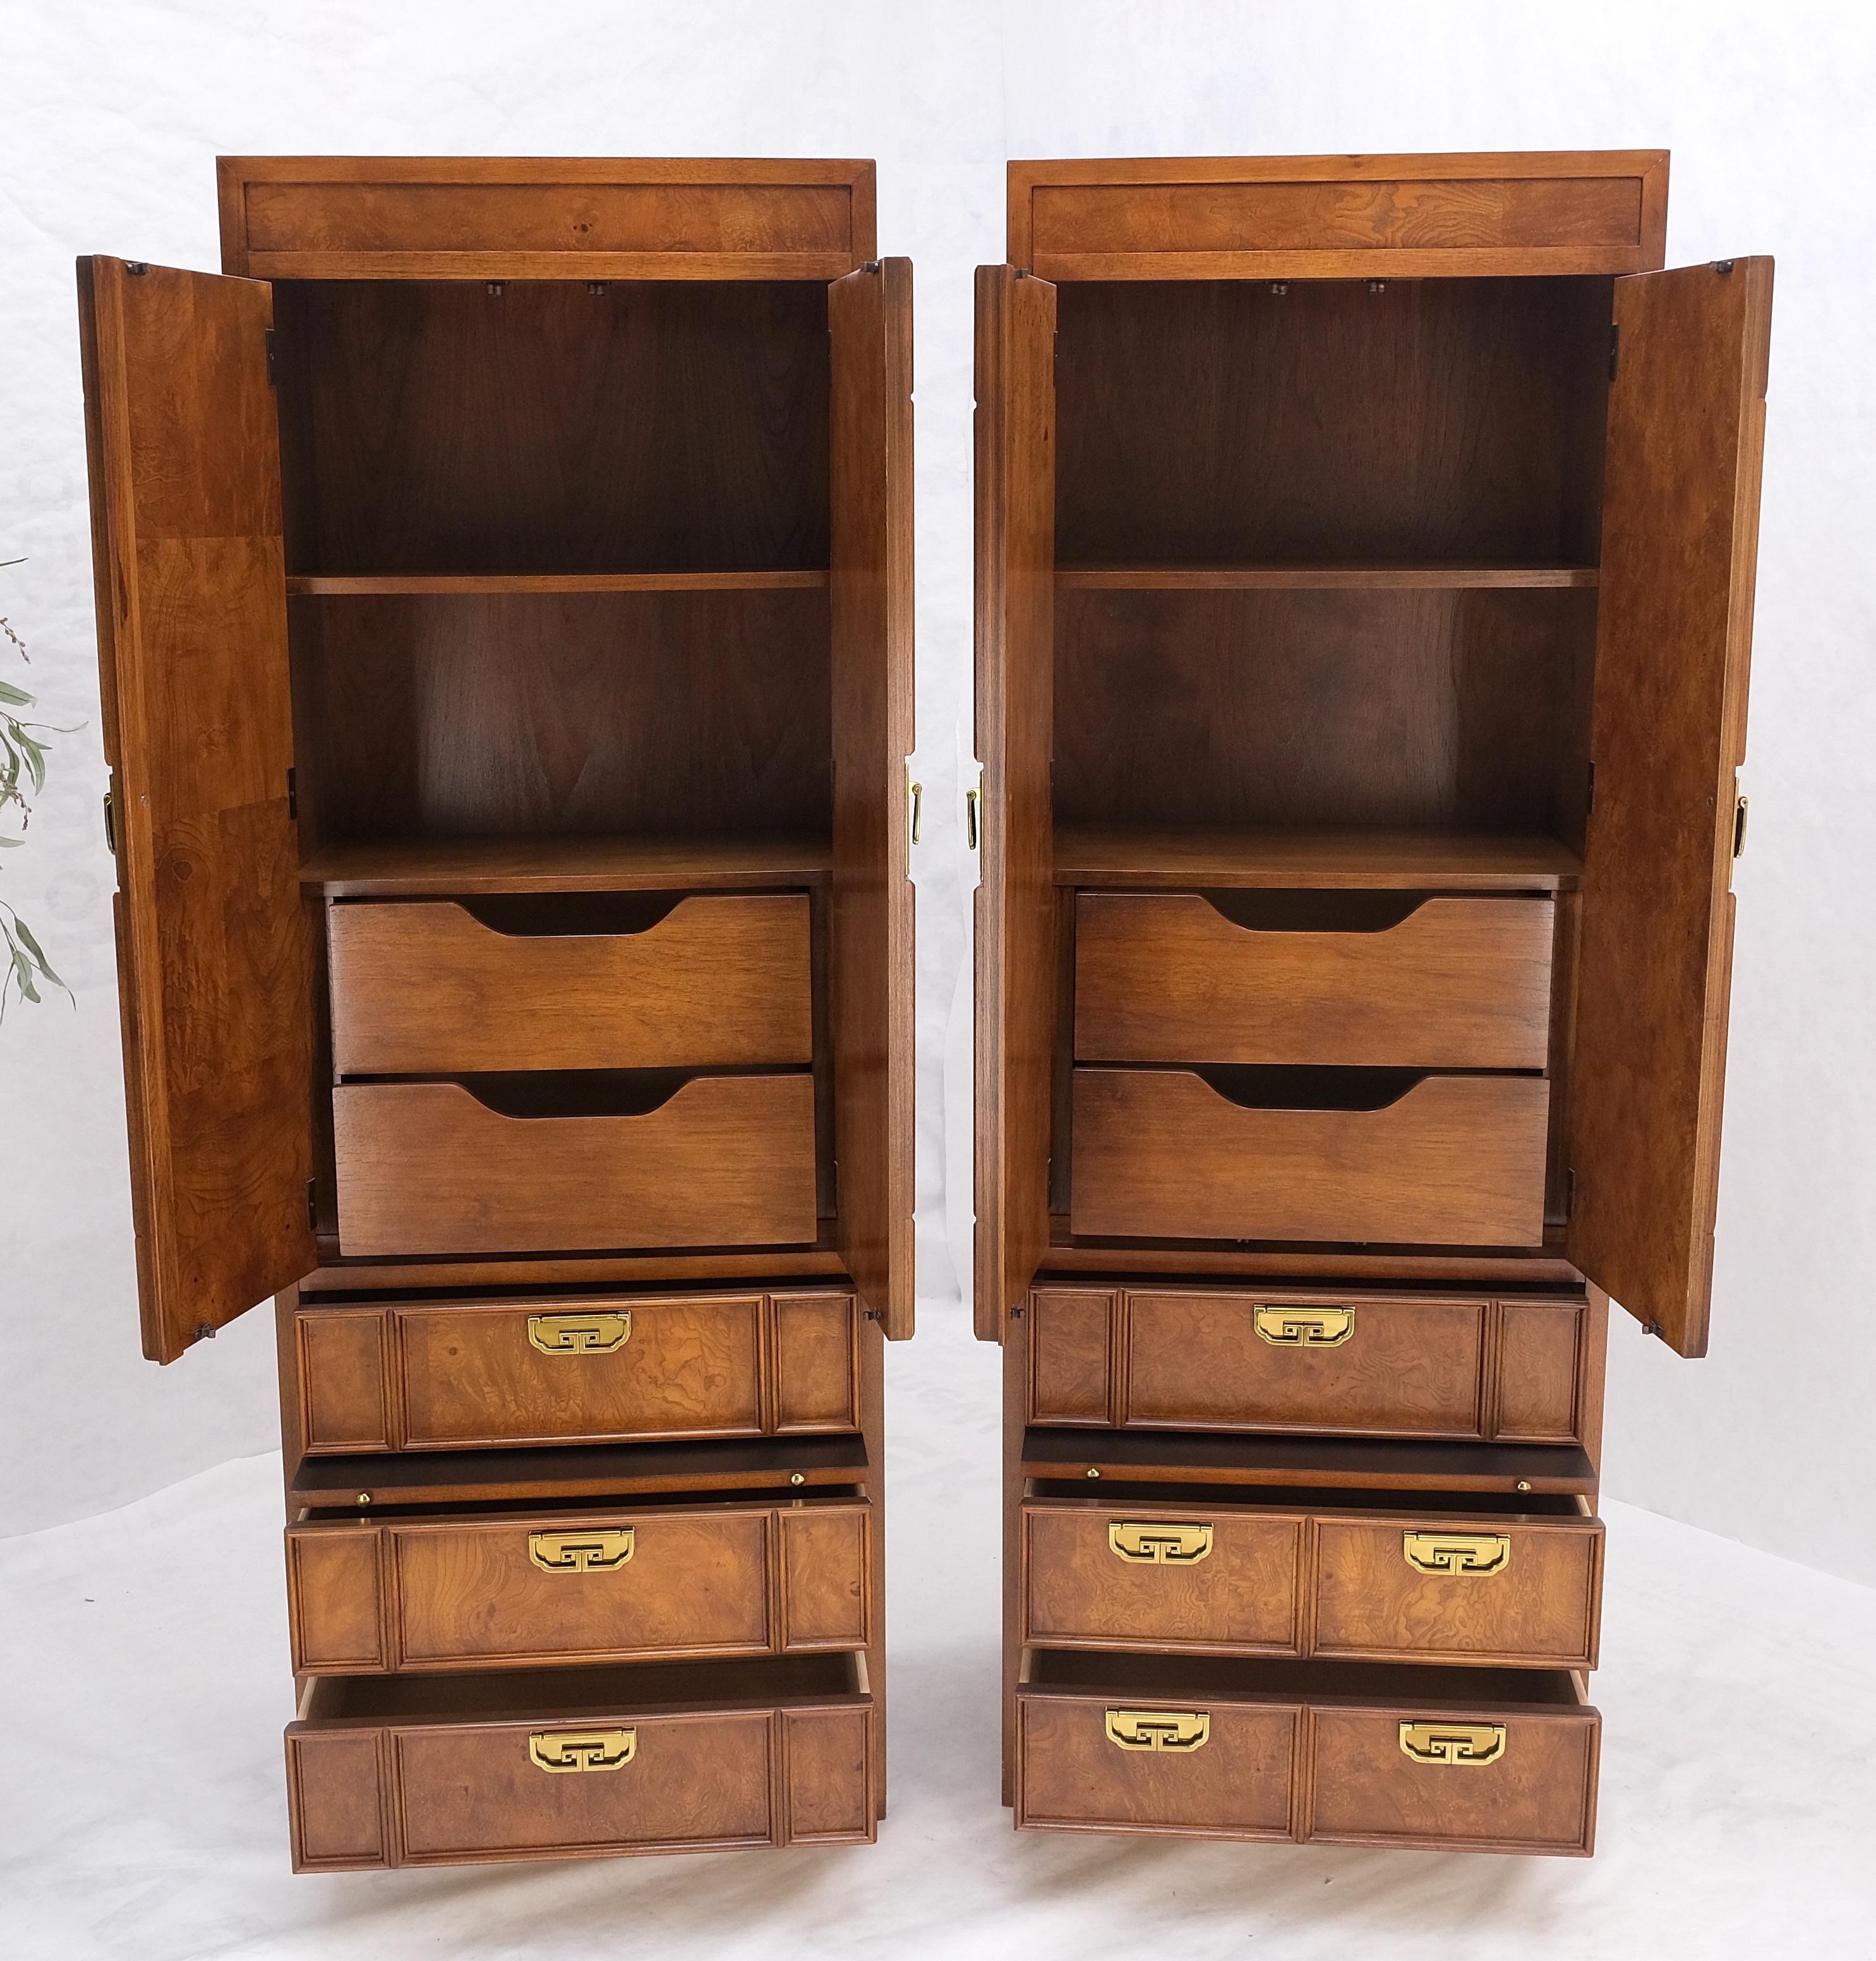 Pair of Thomasville tall tower shape highboy dressers w/ drawer compartment burl wood brass pulls mint!
Featuring laminated pull out trays shelves and drawers inside the double door compartments.